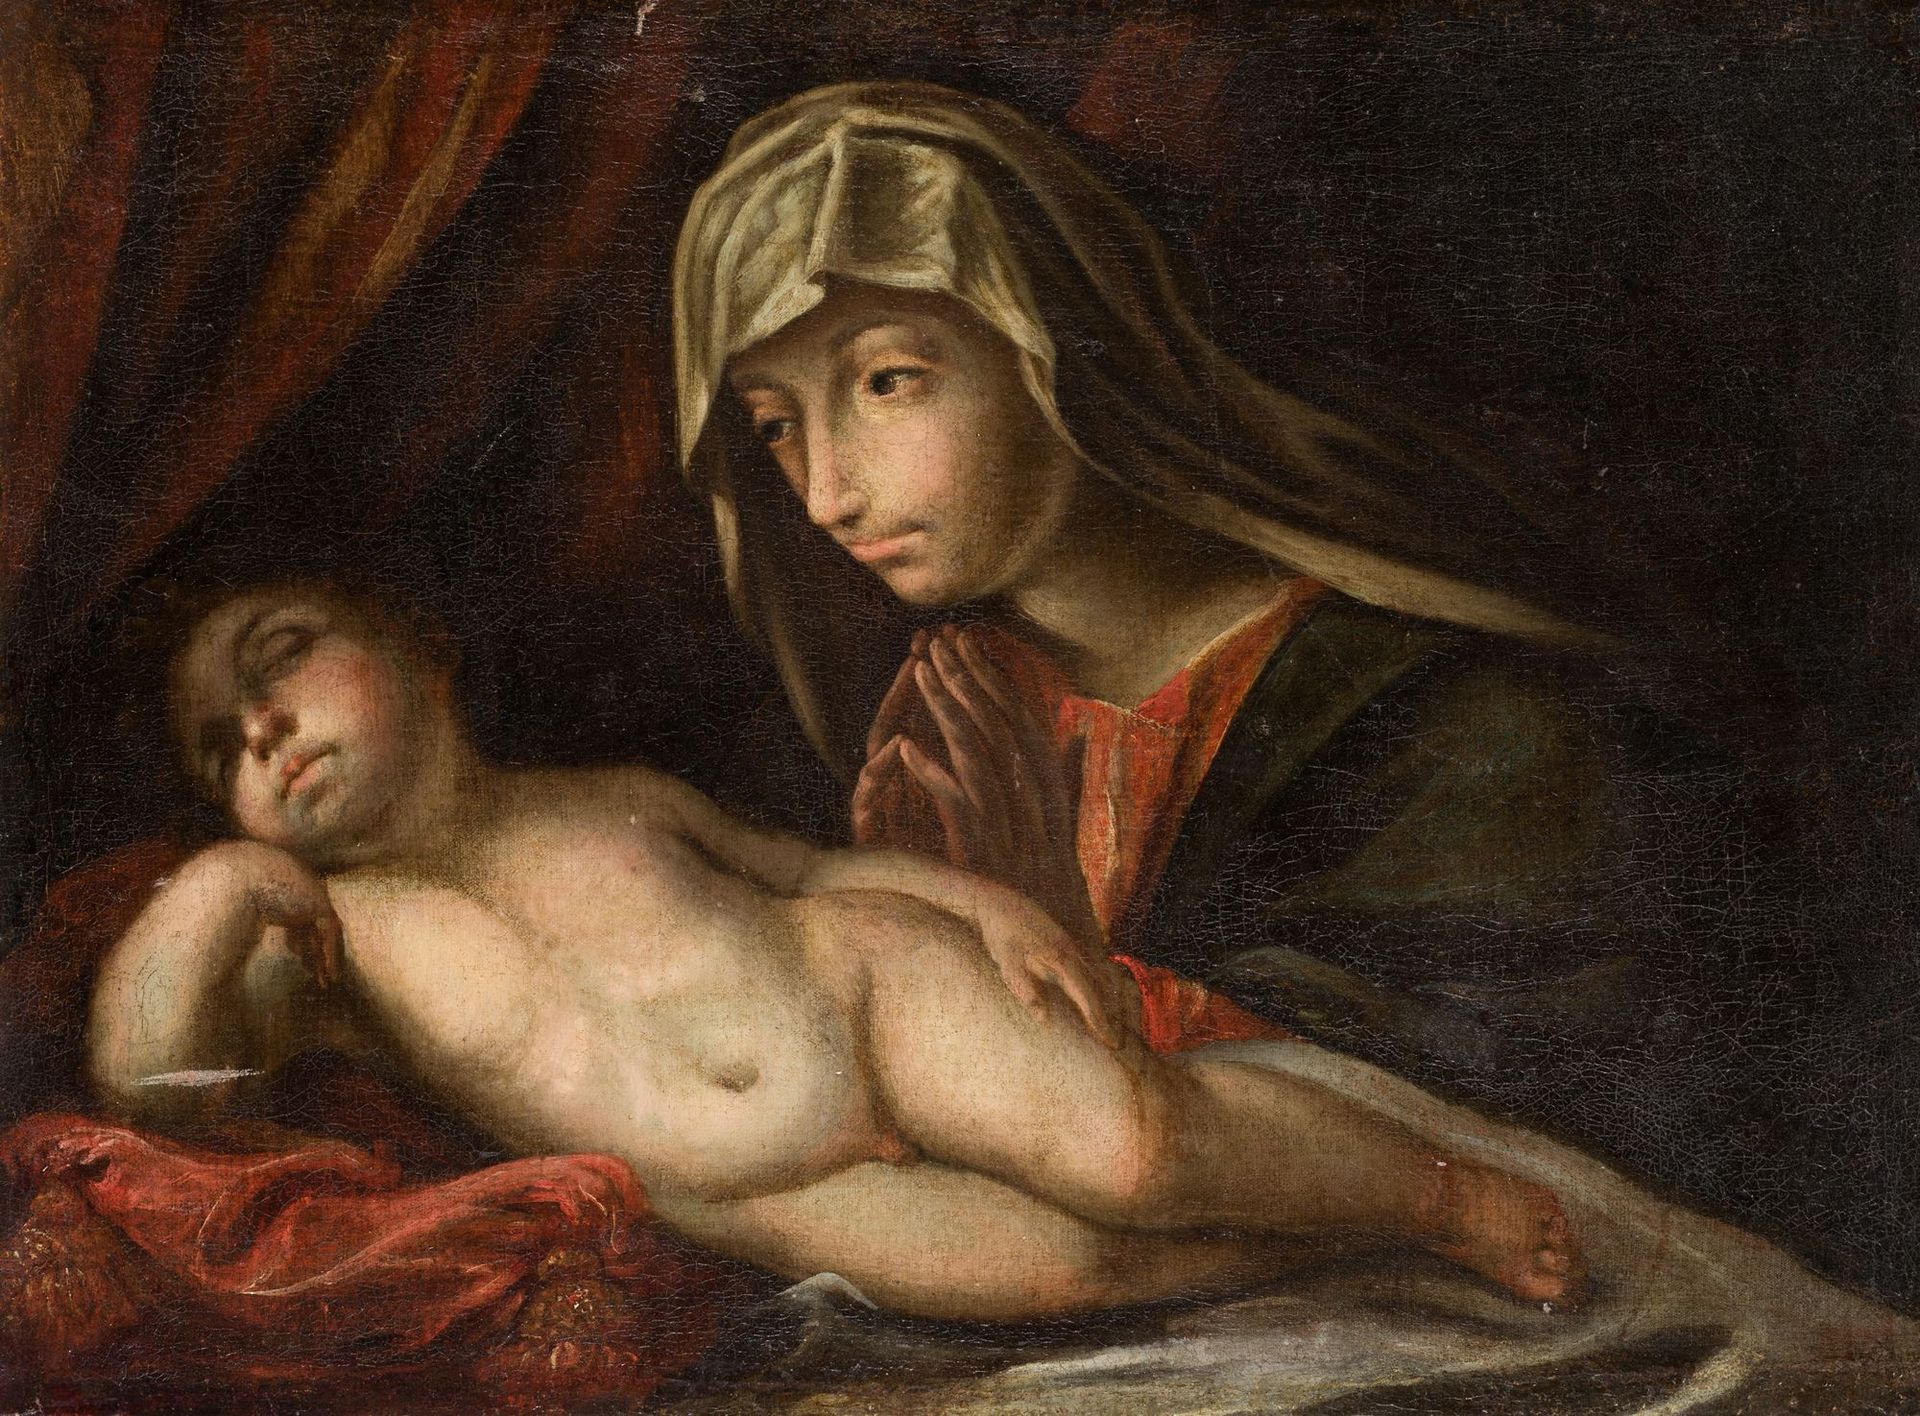 FOLLOWER OF GUIDO RENI (C.17th / .) "Virgin with the sleeping baby" Huile sur to&hellip;